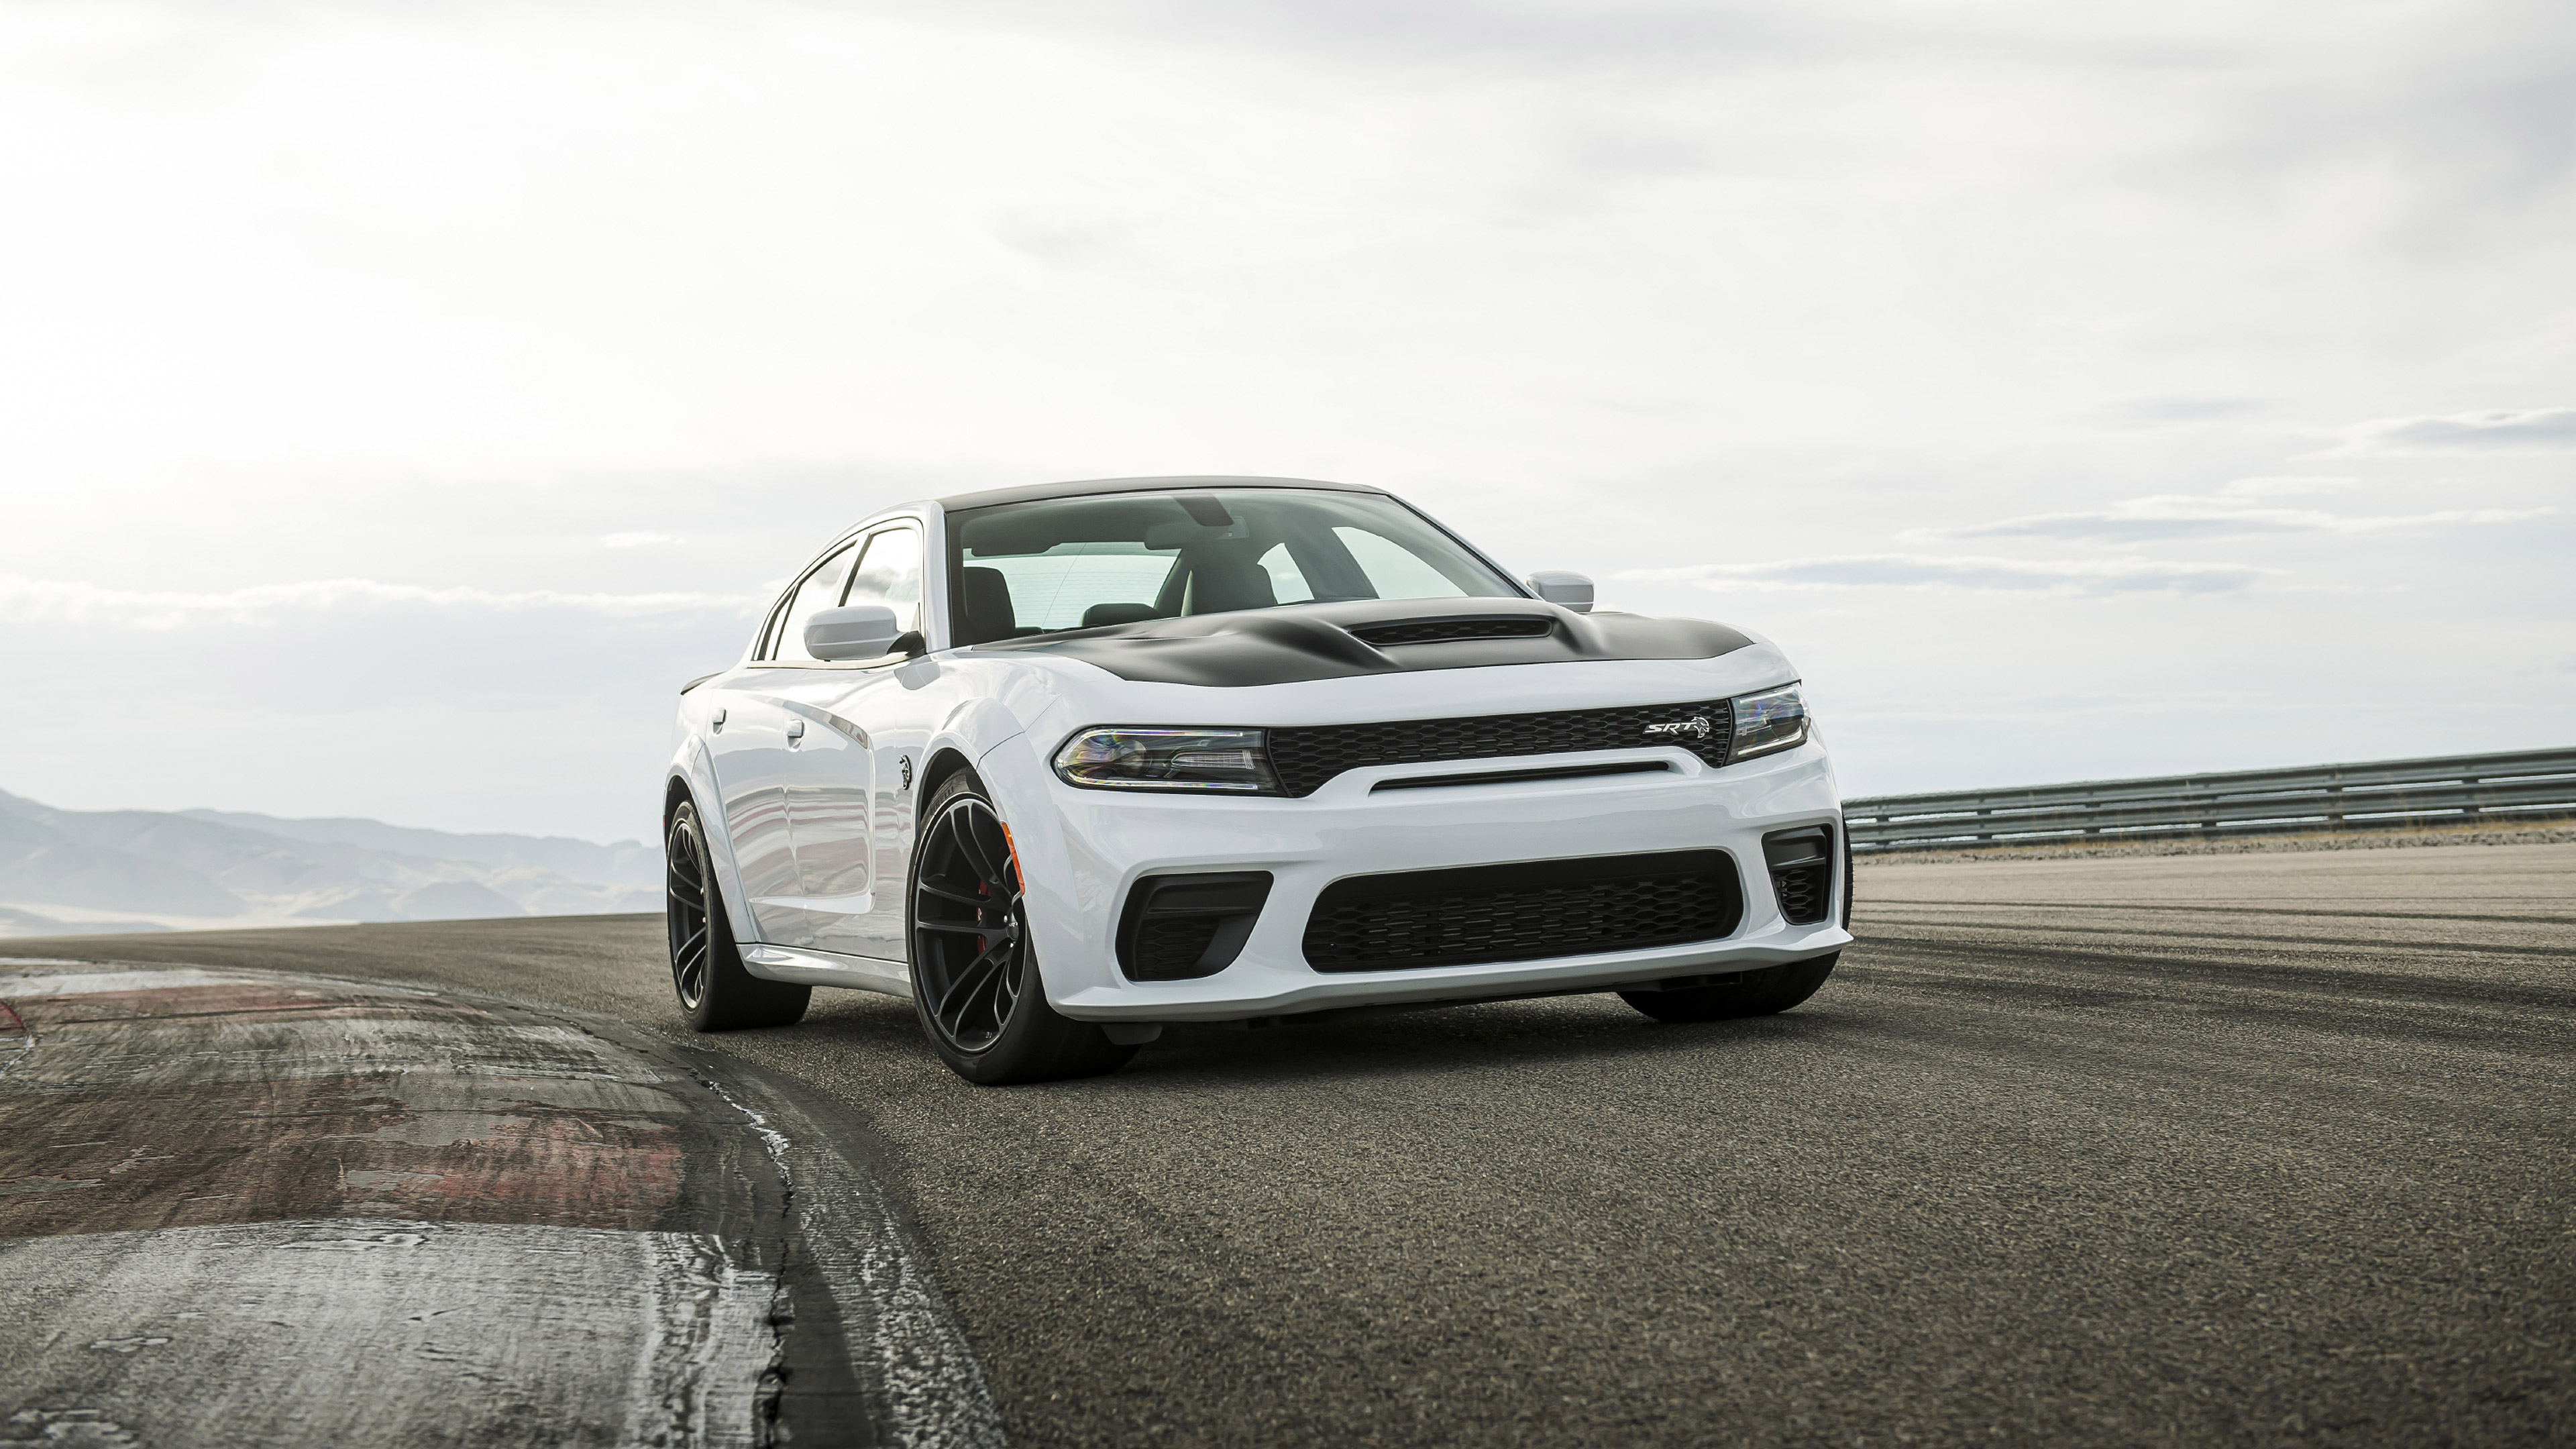 Car Coupe Dodge Charger Srt Hellcat Redeye Muscle Car White Car 3840x2160